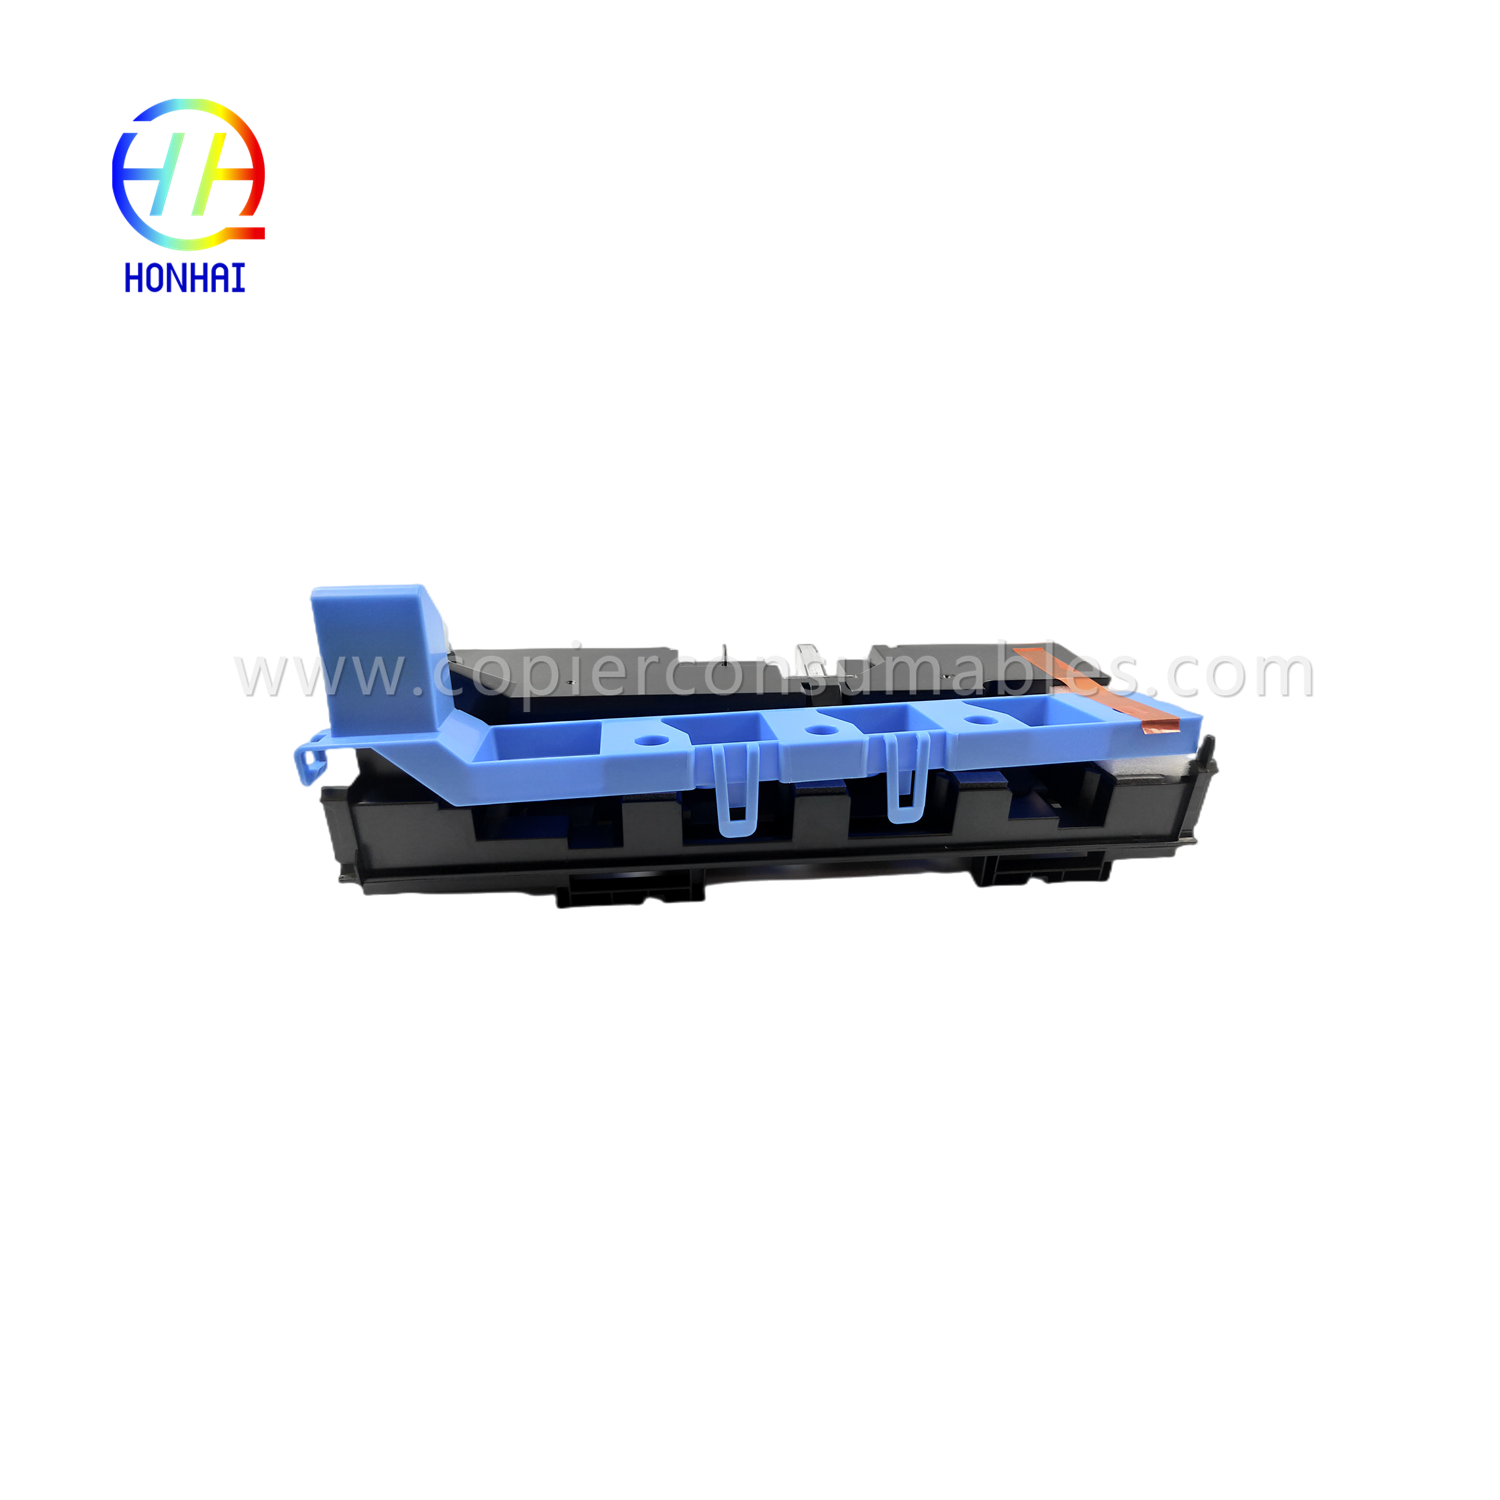 https://c585.goodao.net/waste-toner-container-for-konica-minolta-bizhub-c226-c256-c266-c227-c287-c367-c7333-c7226-c7528-wx-105-a8wajste-1- toner-box-product/